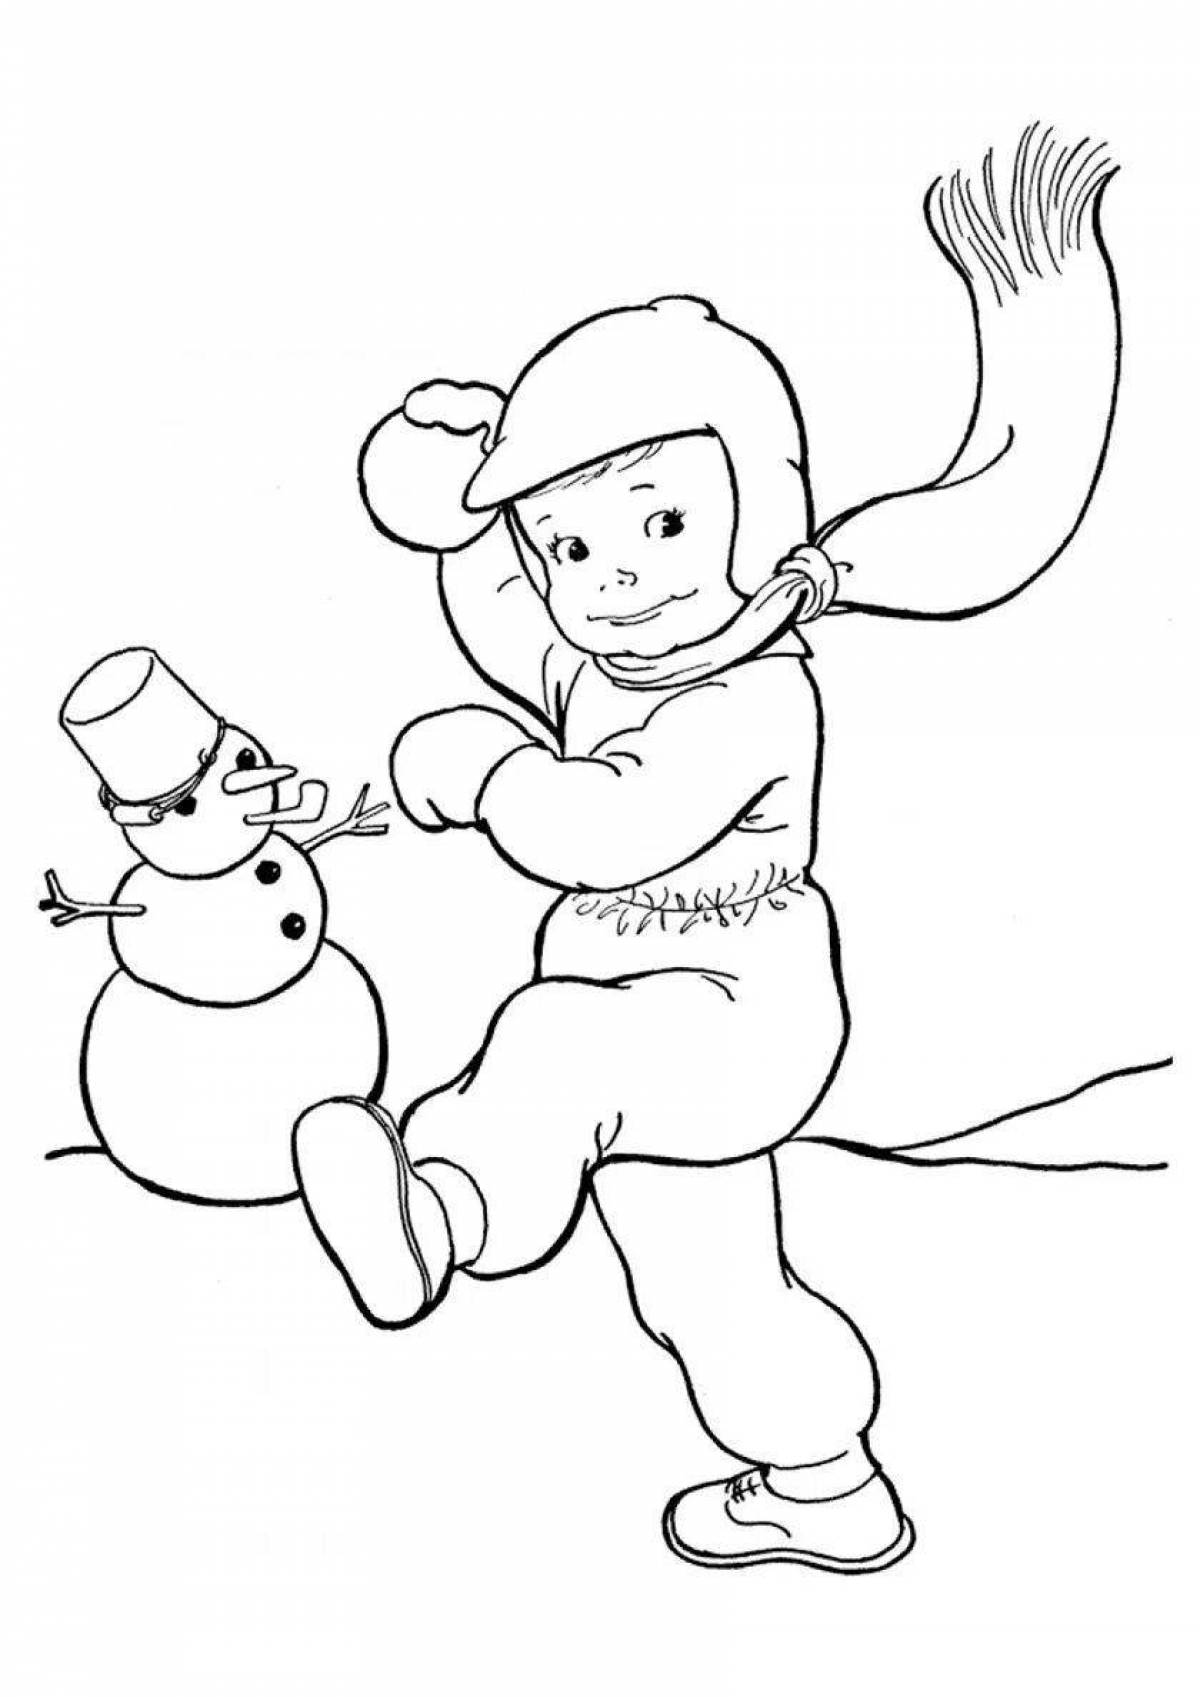 Glowing snowballs coloring book for kids